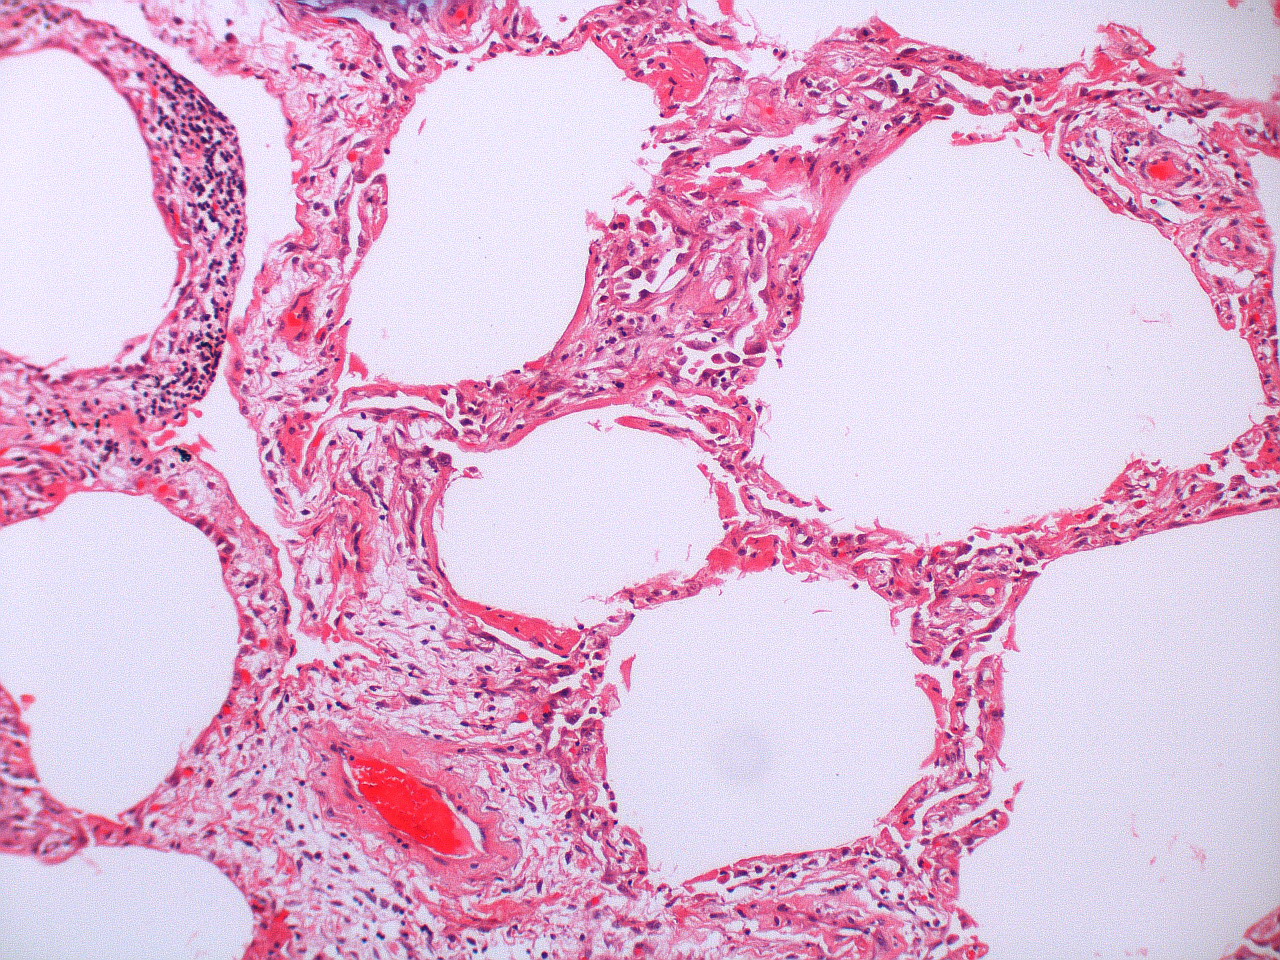 Histological slide of lung tissue. Alveoli are surrounded by severely thickened septum with darker dots of infiltrating cells seen in the walls. There is a capillary showing filled with a dark red circle indicating the presence of a clot.